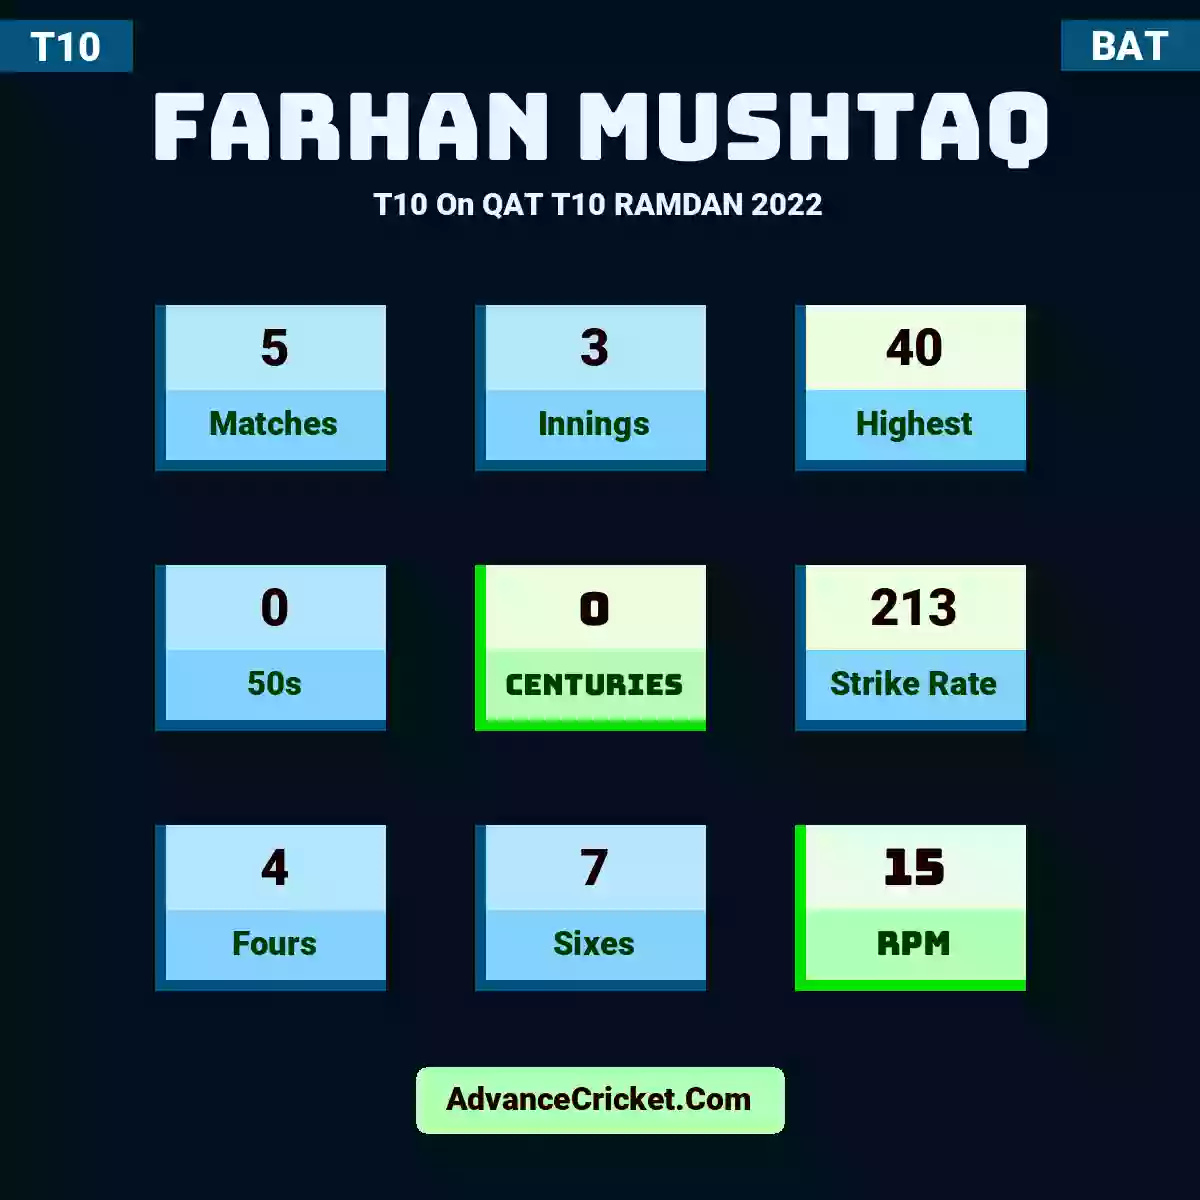 Farhan Mushtaq T10  On QAT T10 RAMDAN 2022, Farhan Mushtaq played 5 matches, scored 40 runs as highest, 0 half-centuries, and 0 centuries, with a strike rate of 213. F.Mushtaq hit 4 fours and 7 sixes, with an RPM of 15.